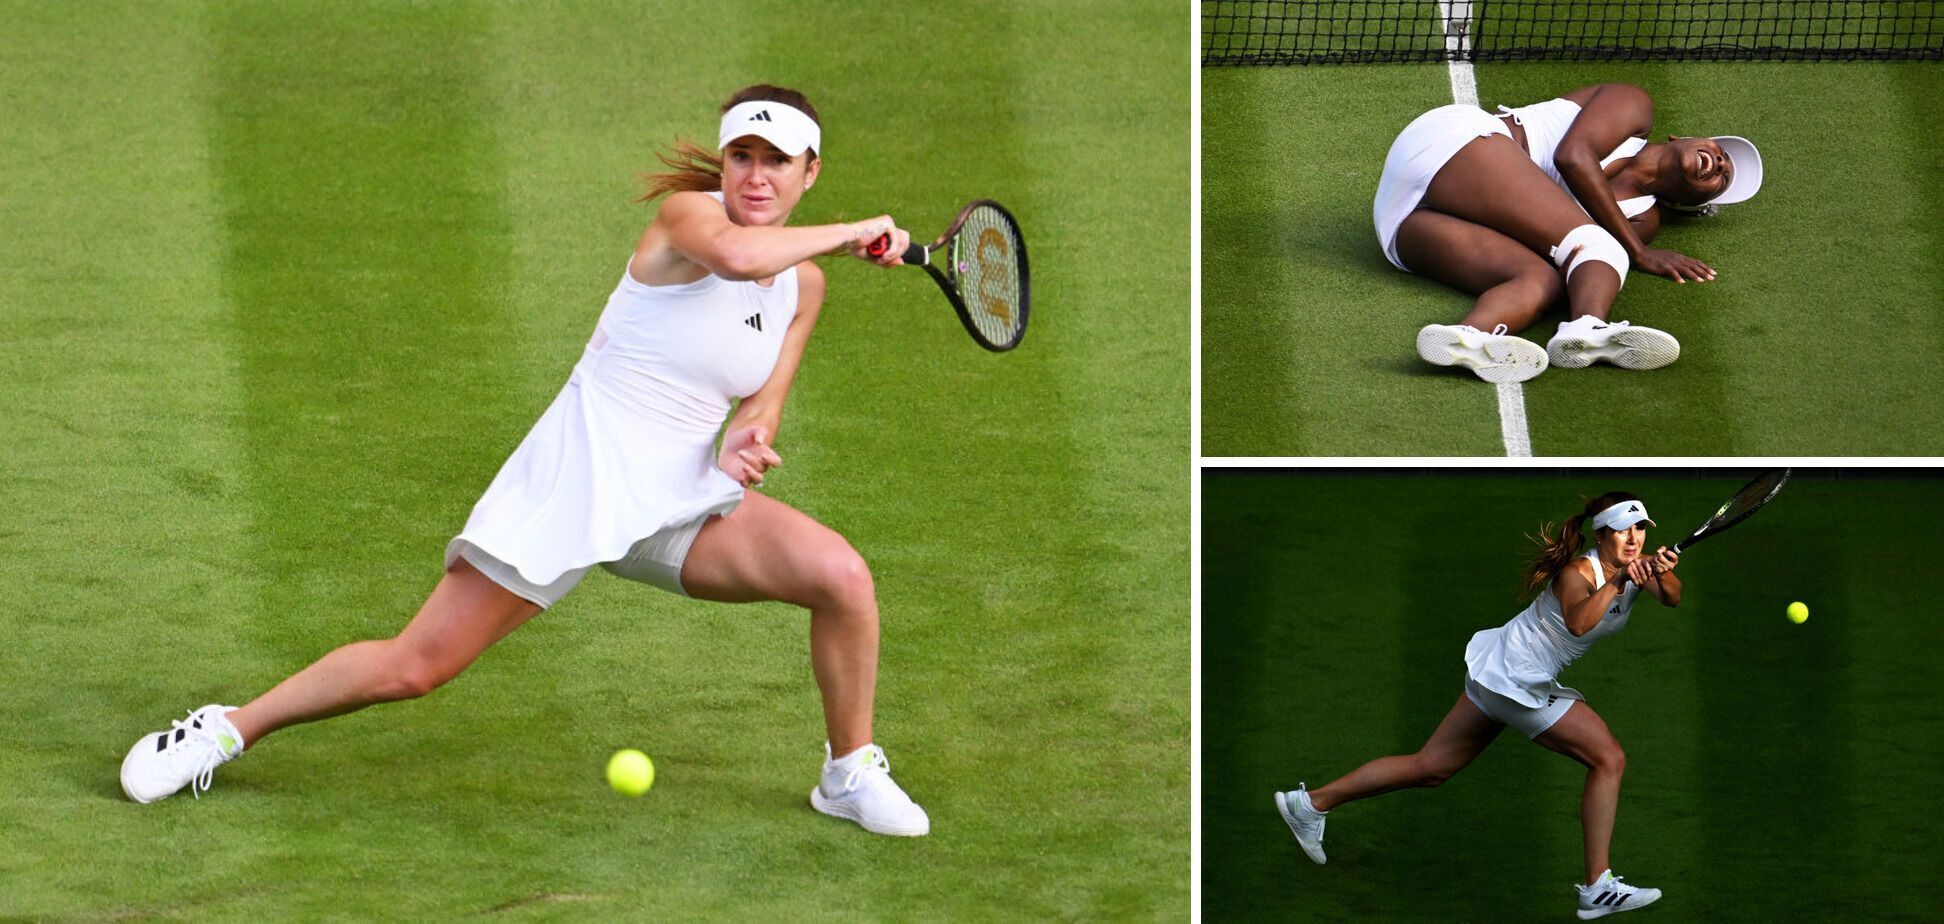 Svitolina leaves centre court in tears at Wimbledon. Video